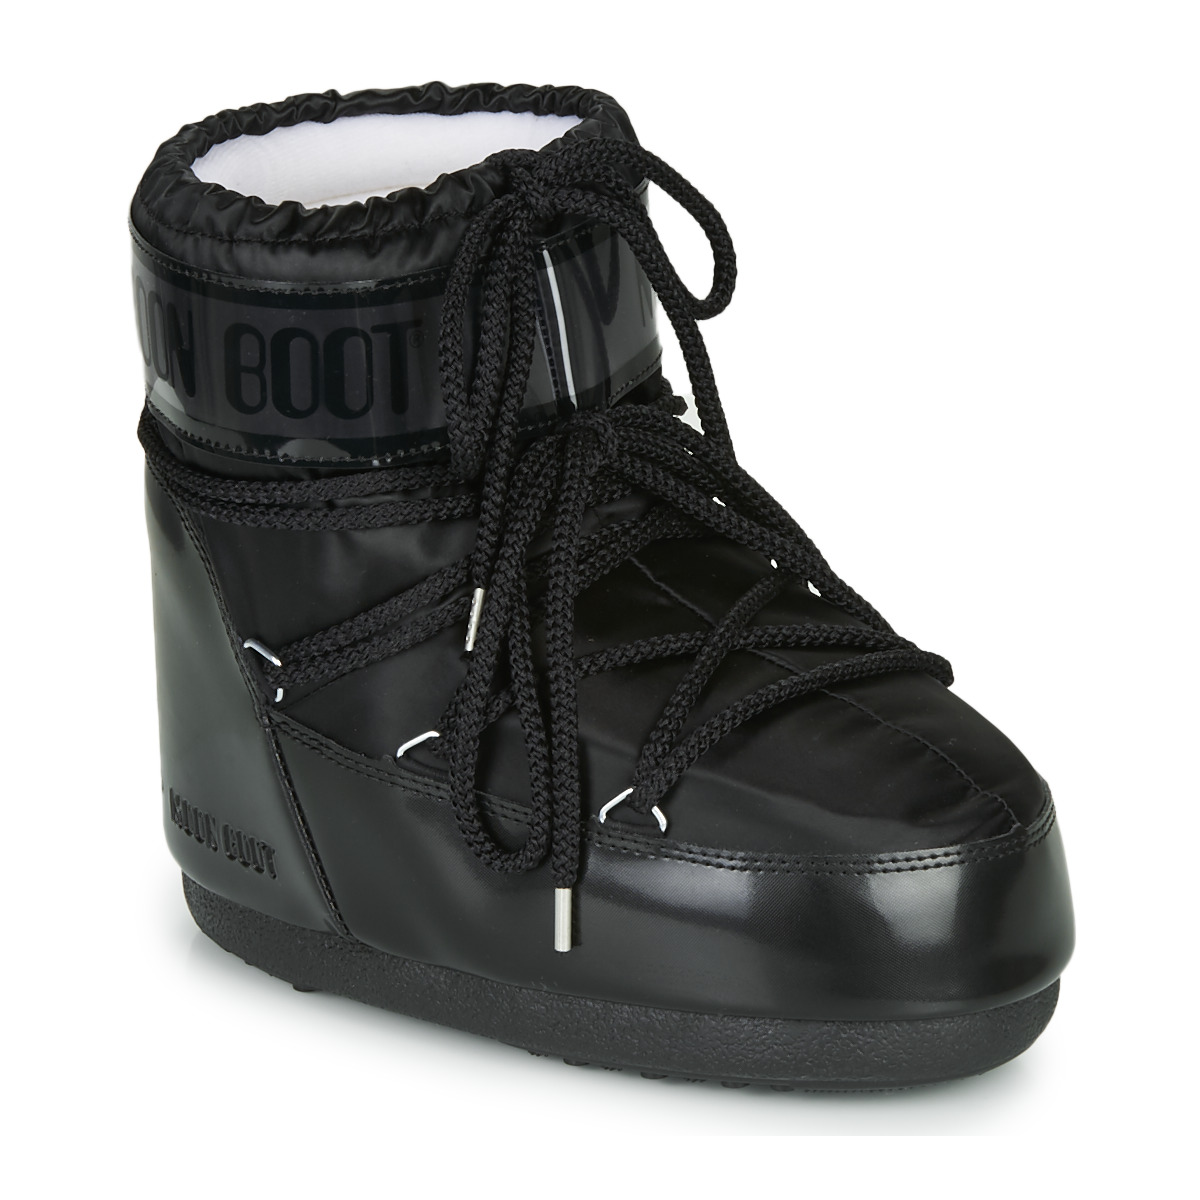 MOON BOOT CLASSIC LOW GLANCE